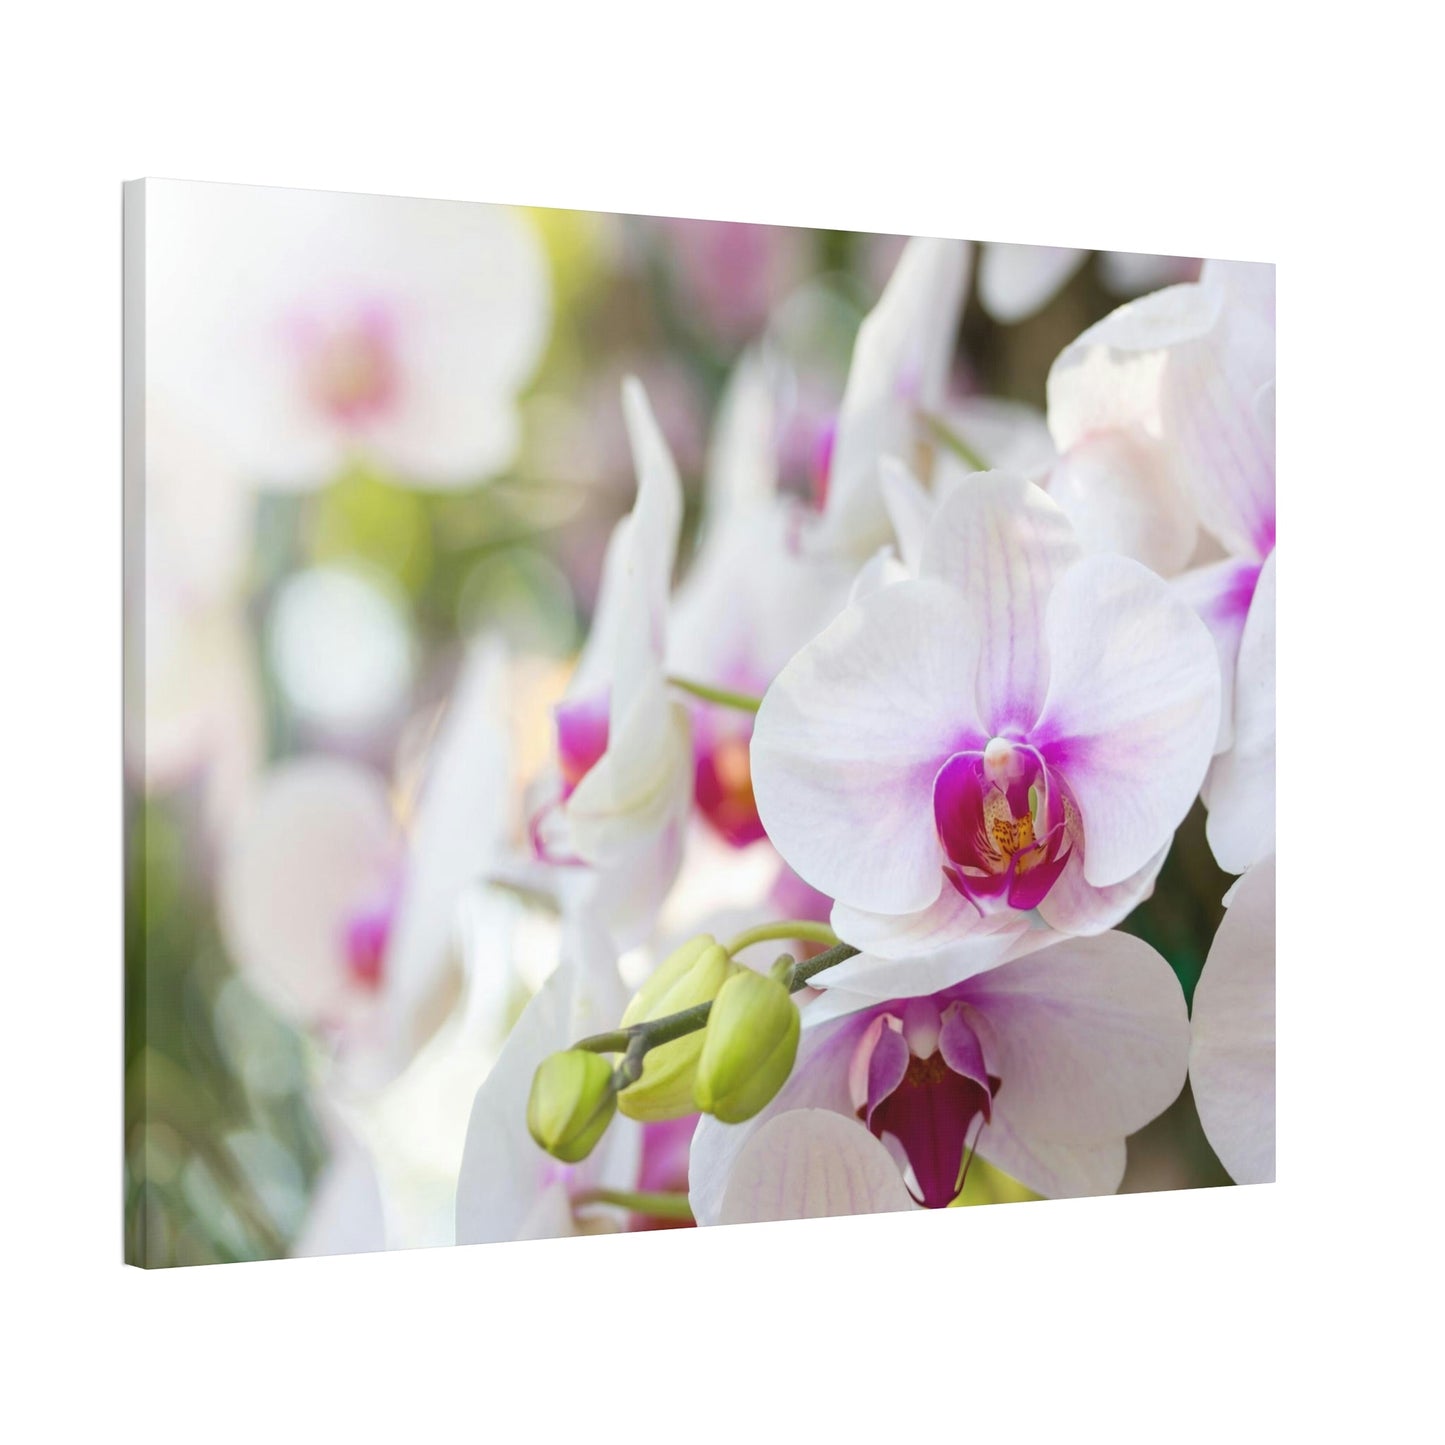 Floral Symphony: Orchids in Harmony